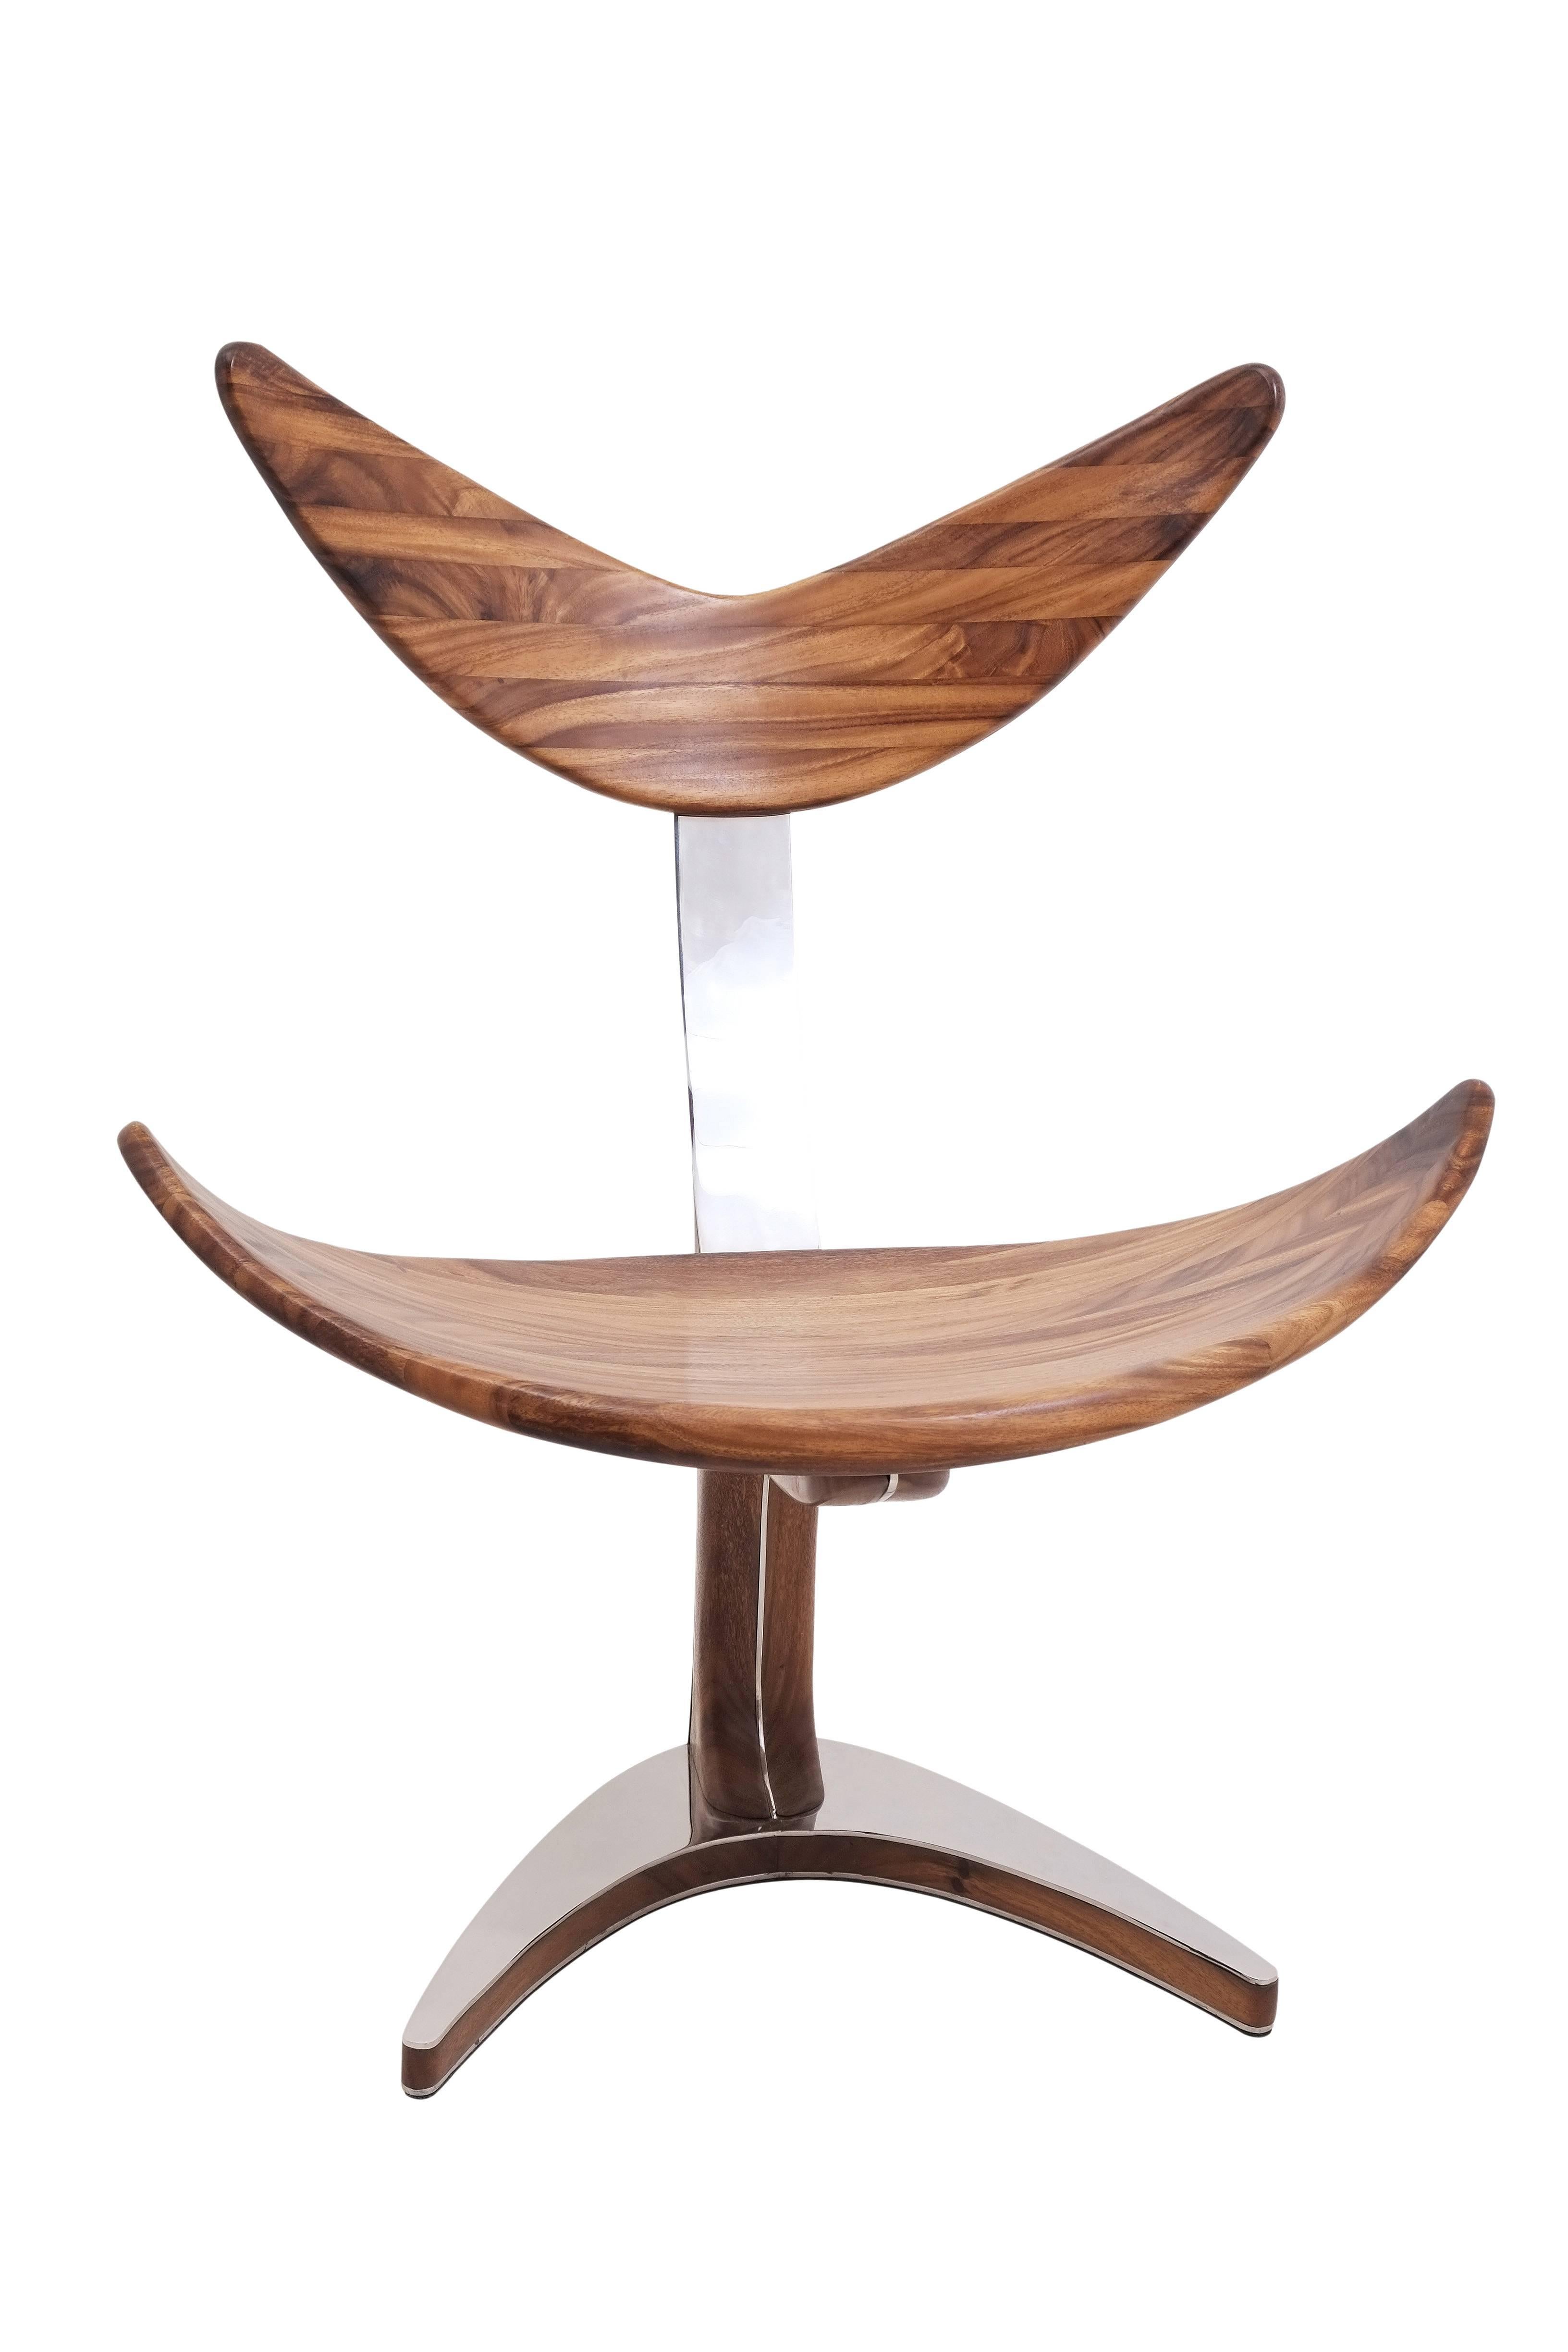 Elegant and stylish chair inspired by whale tail made of solid suar wood (tropical acacia) with mirror polished stainless steel.
Ottoman included.

Dimension: 
Seat height 42 cm / 16.53 in
Base legs 45 cm by 60 cm / 17.72 in by 23.62 in
Total